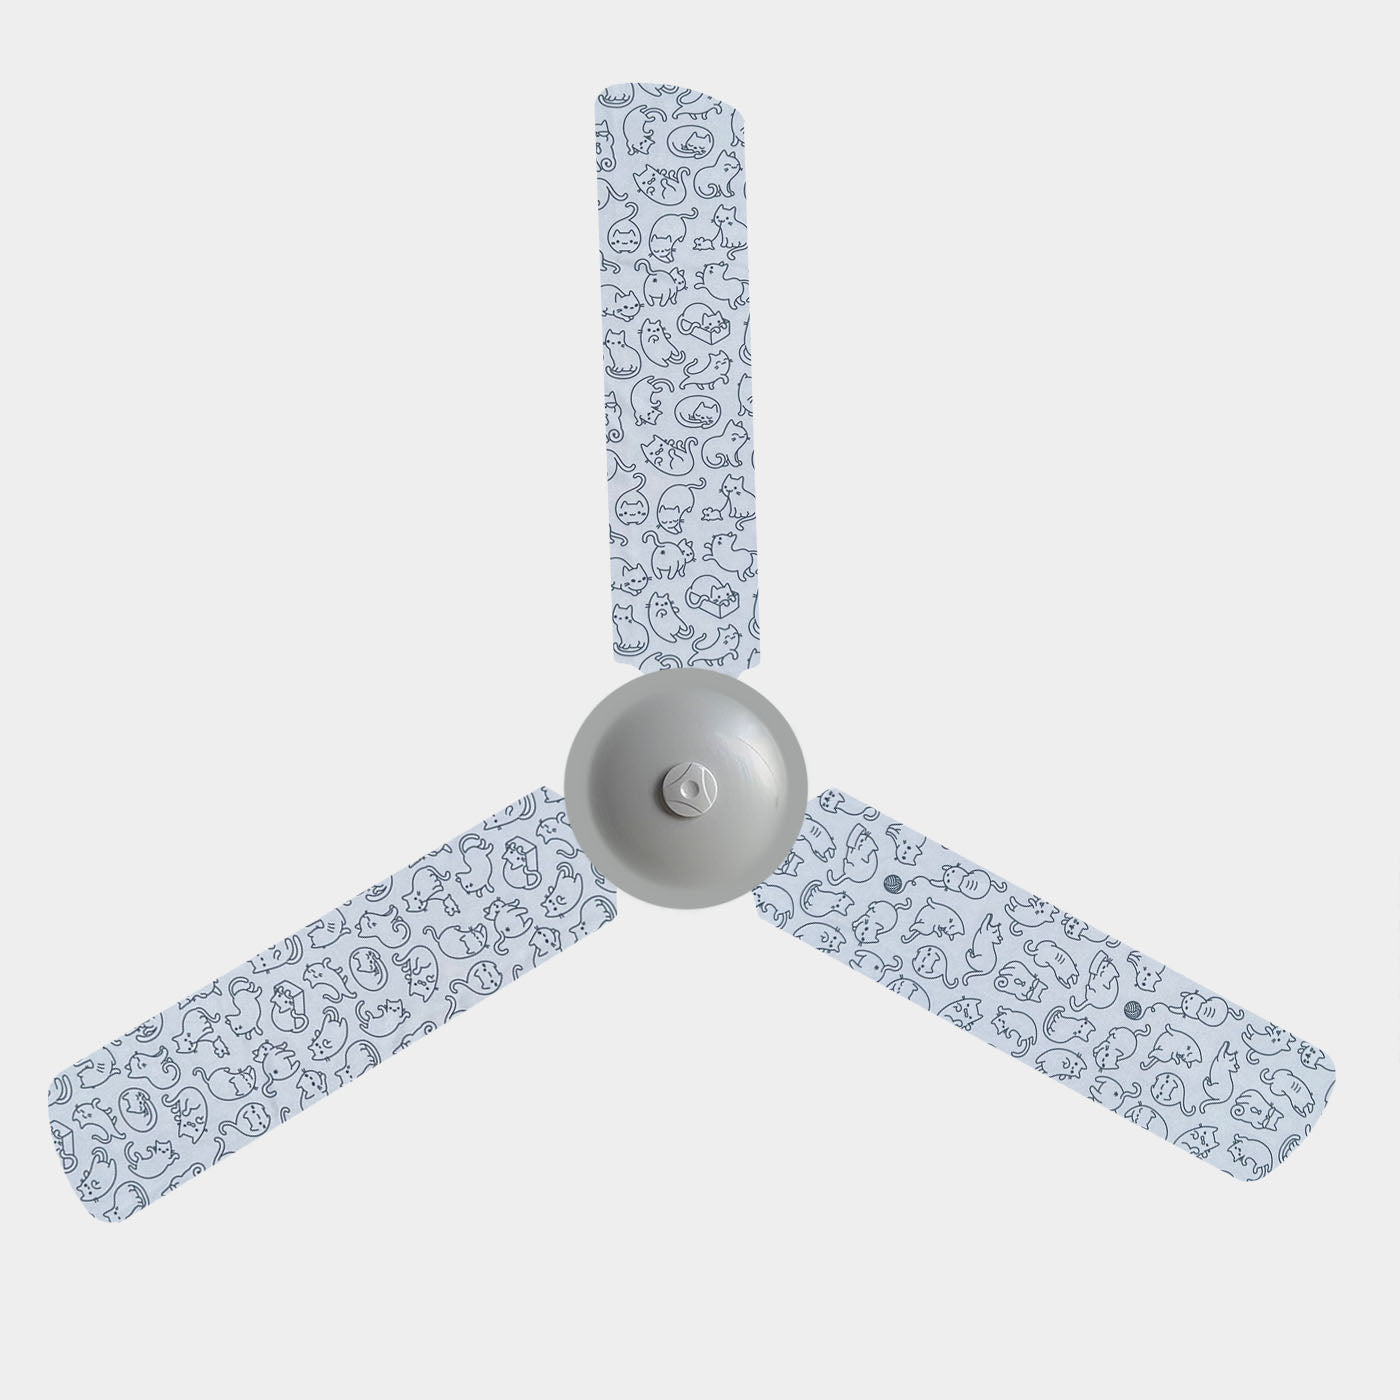 Playful cats in black line drawings on a white background ceiling fan blade covers on a 3 blade fan